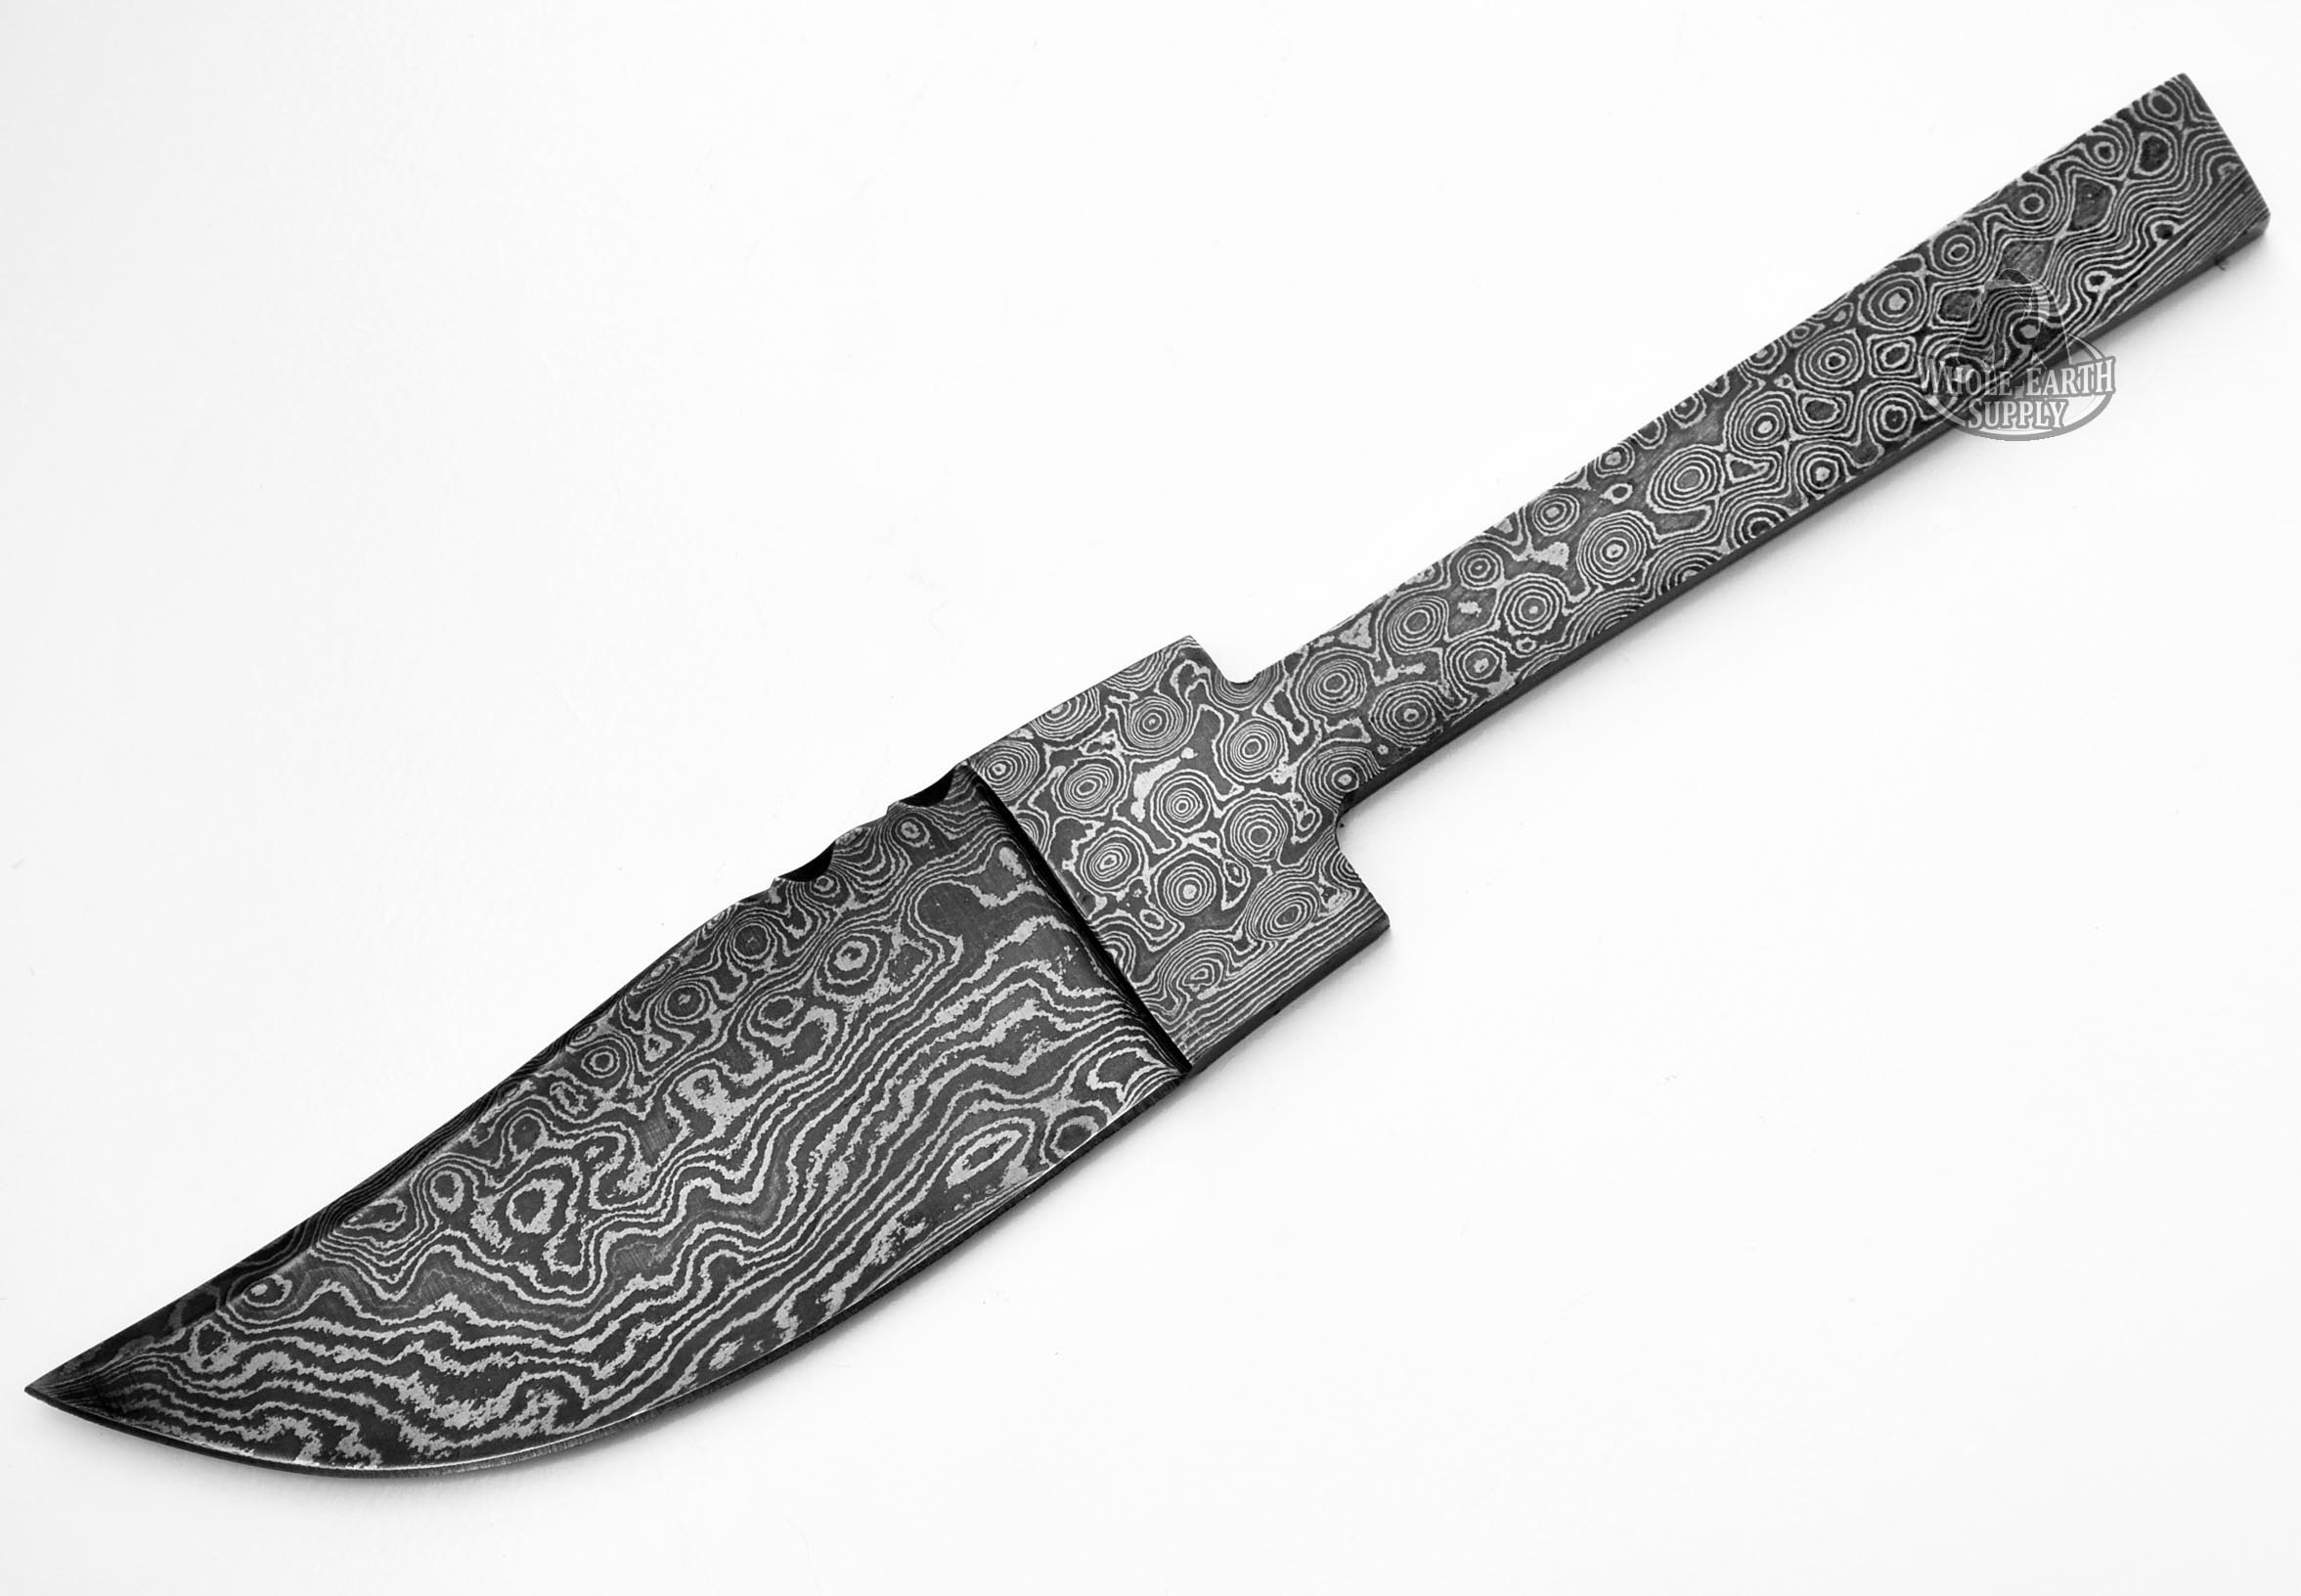 Partial Tang Wide Hunting Skinner Damascus Blank Blanks Blade Knife Knives Making High Carbon Steel